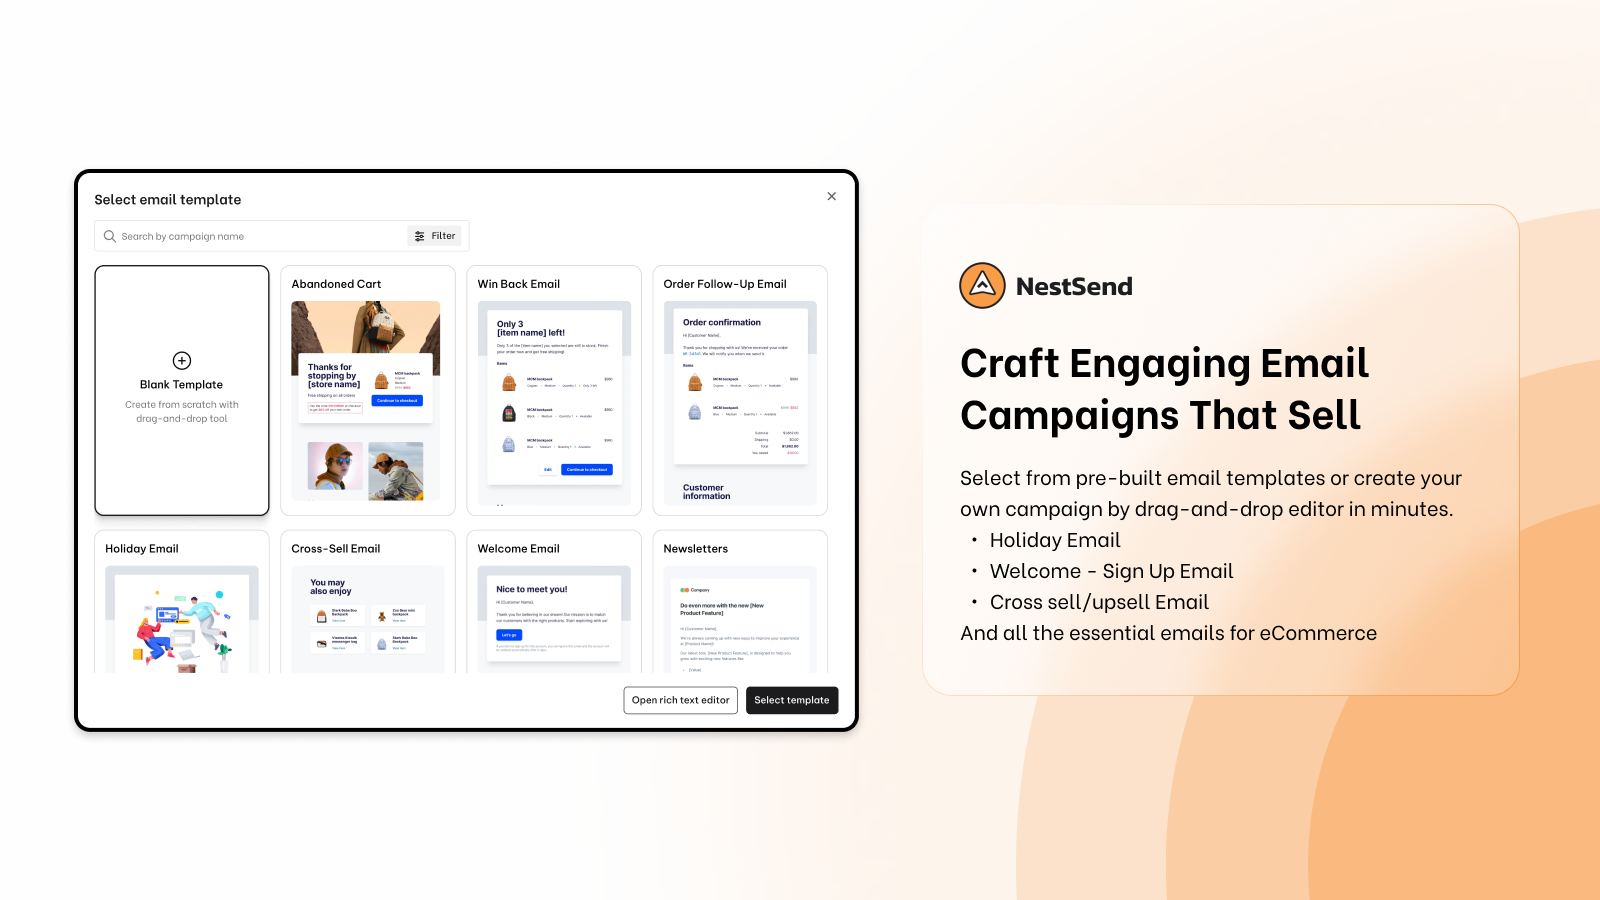 Craft engaging email campaigns that sell